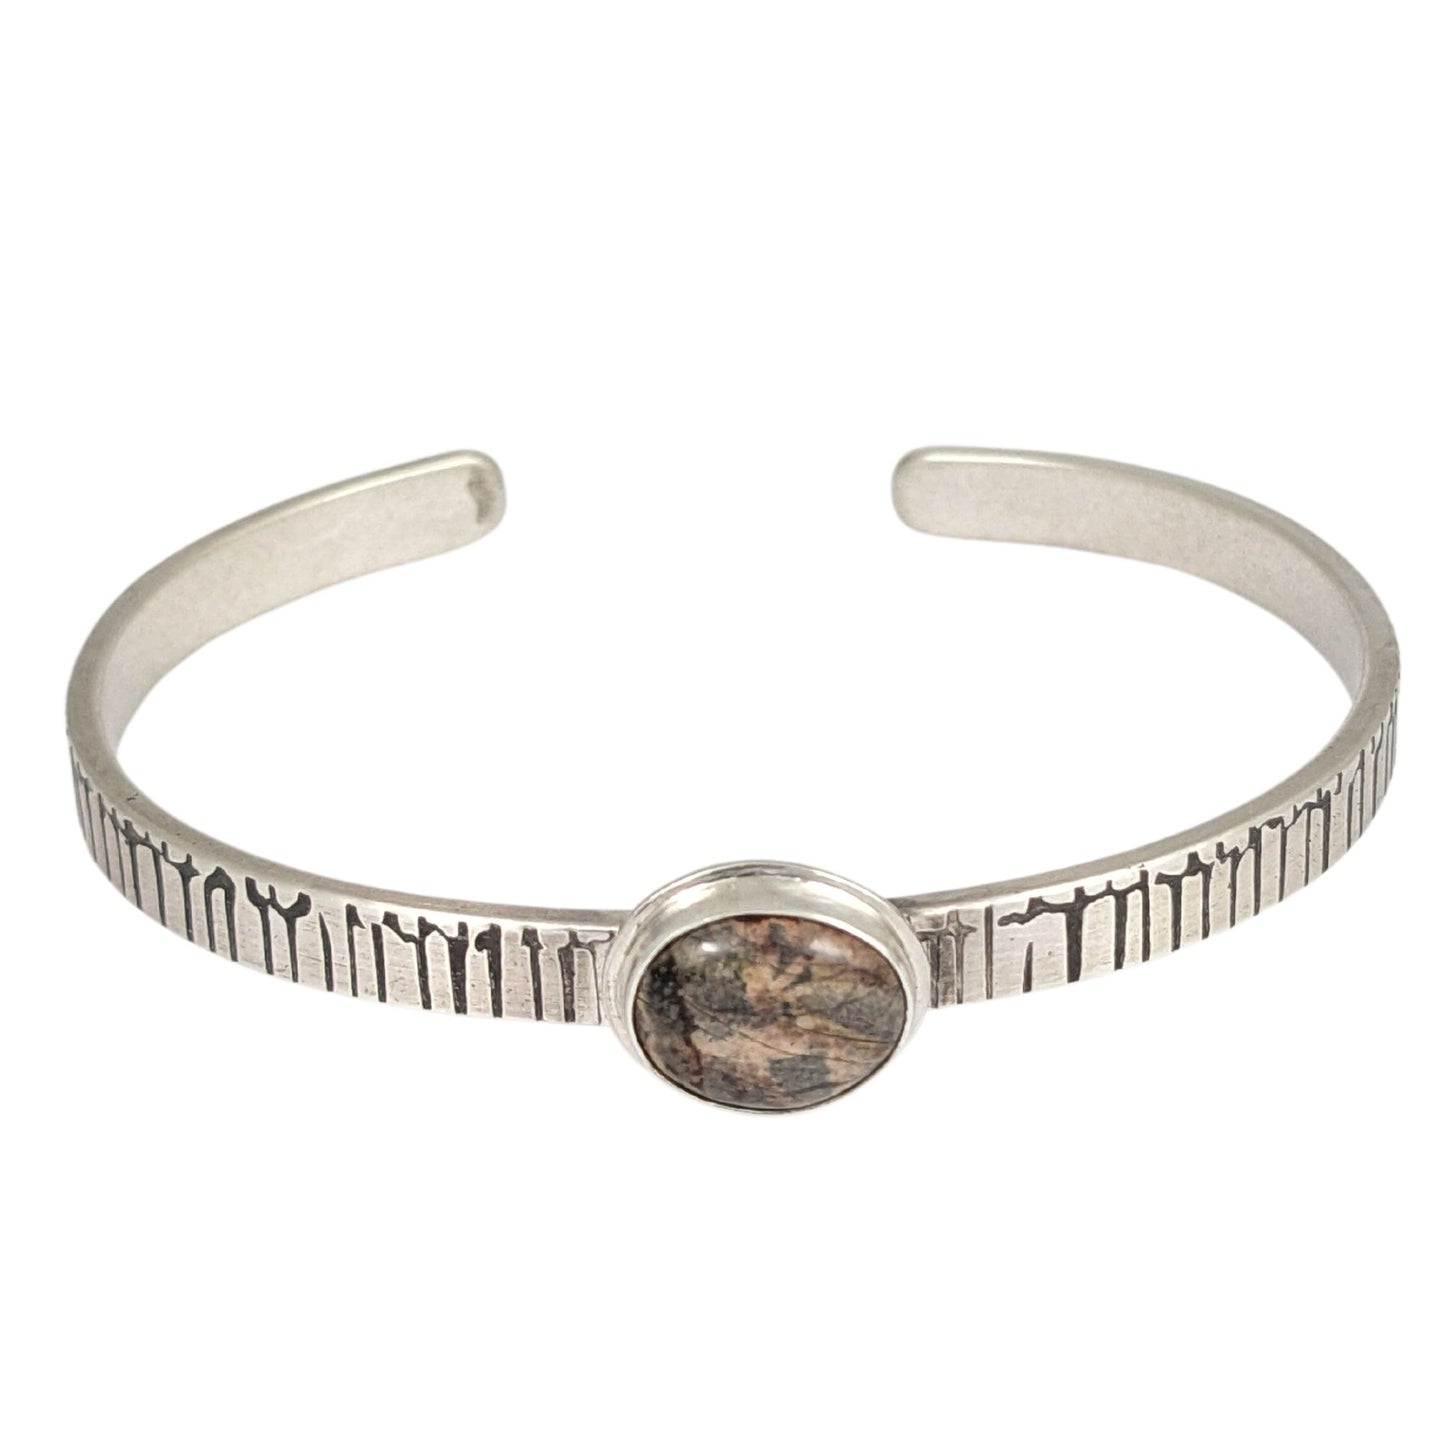 A stone in muted shades of pink, gray, and brown set on a narrow rectangular shaped sterling silver cuff bracelet. The cuff has a design that looks like an earthquake seismograph chart.